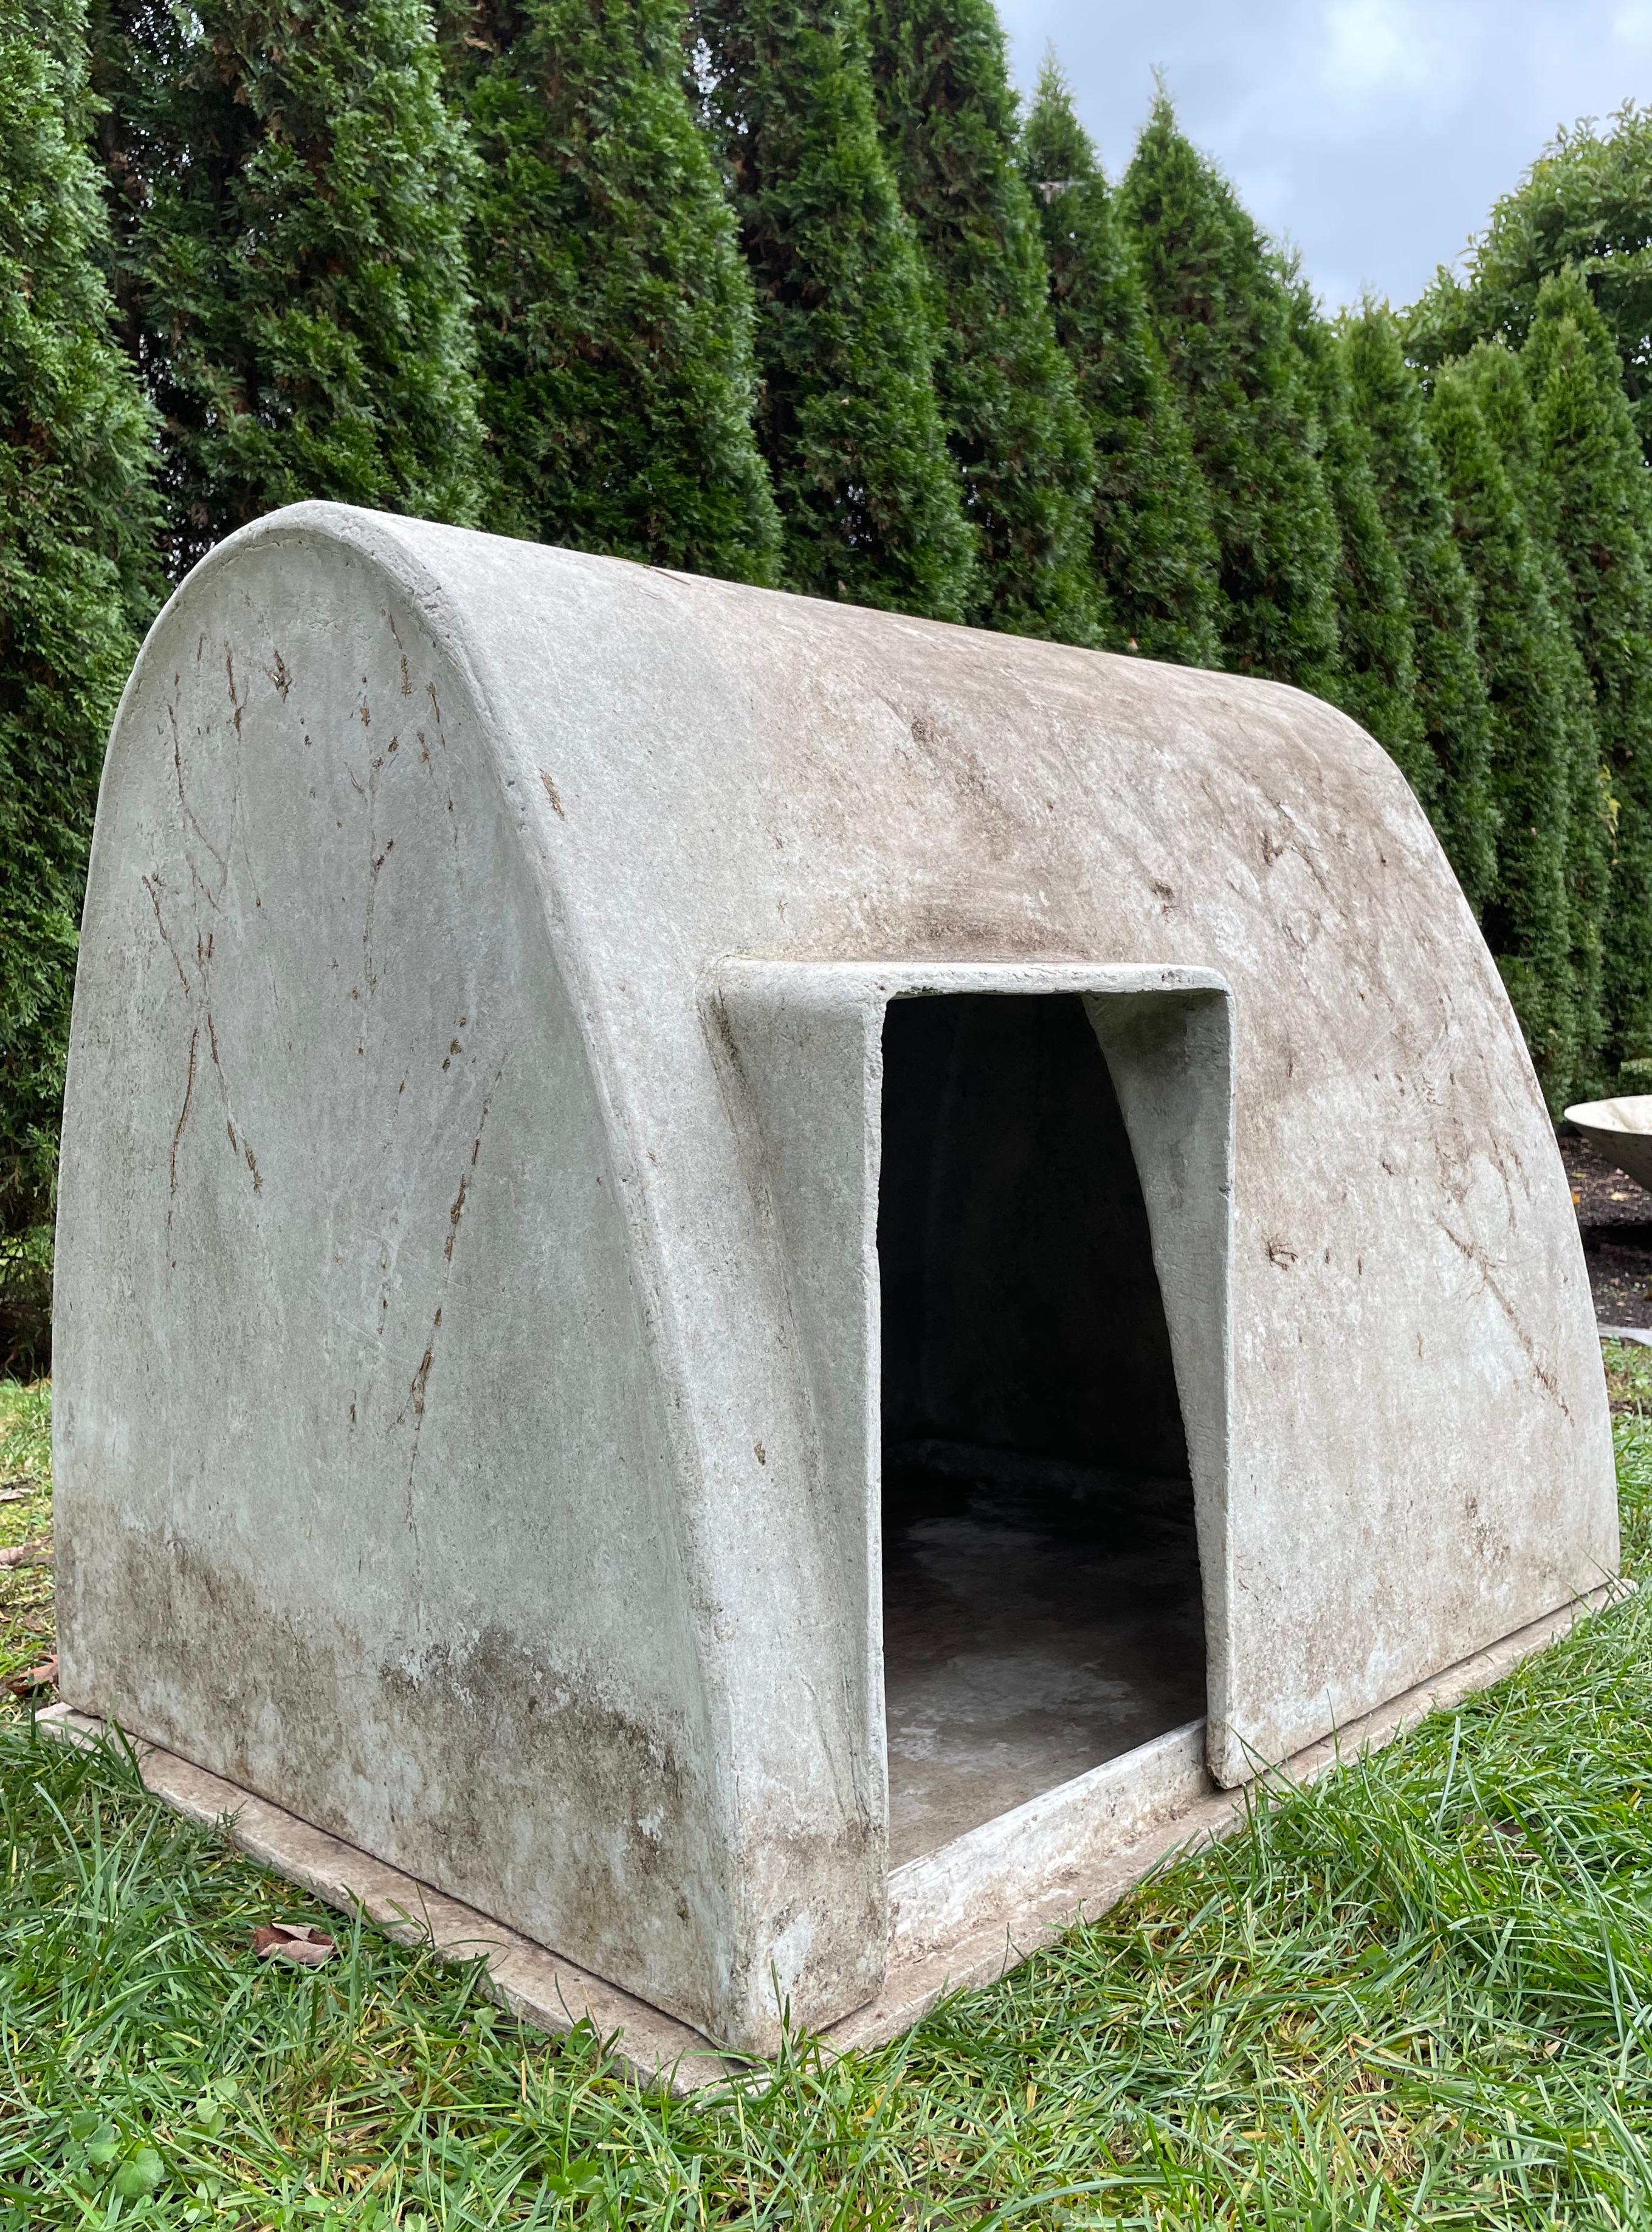 Designed by the iconic Willy Guhl in the 1960s and made of strong and lightweight fiber cement by Eternit, SA of Switzerland, this dog house with its original removable pan is the larger of two sizes designed by Guhl. It is in fabulous condition